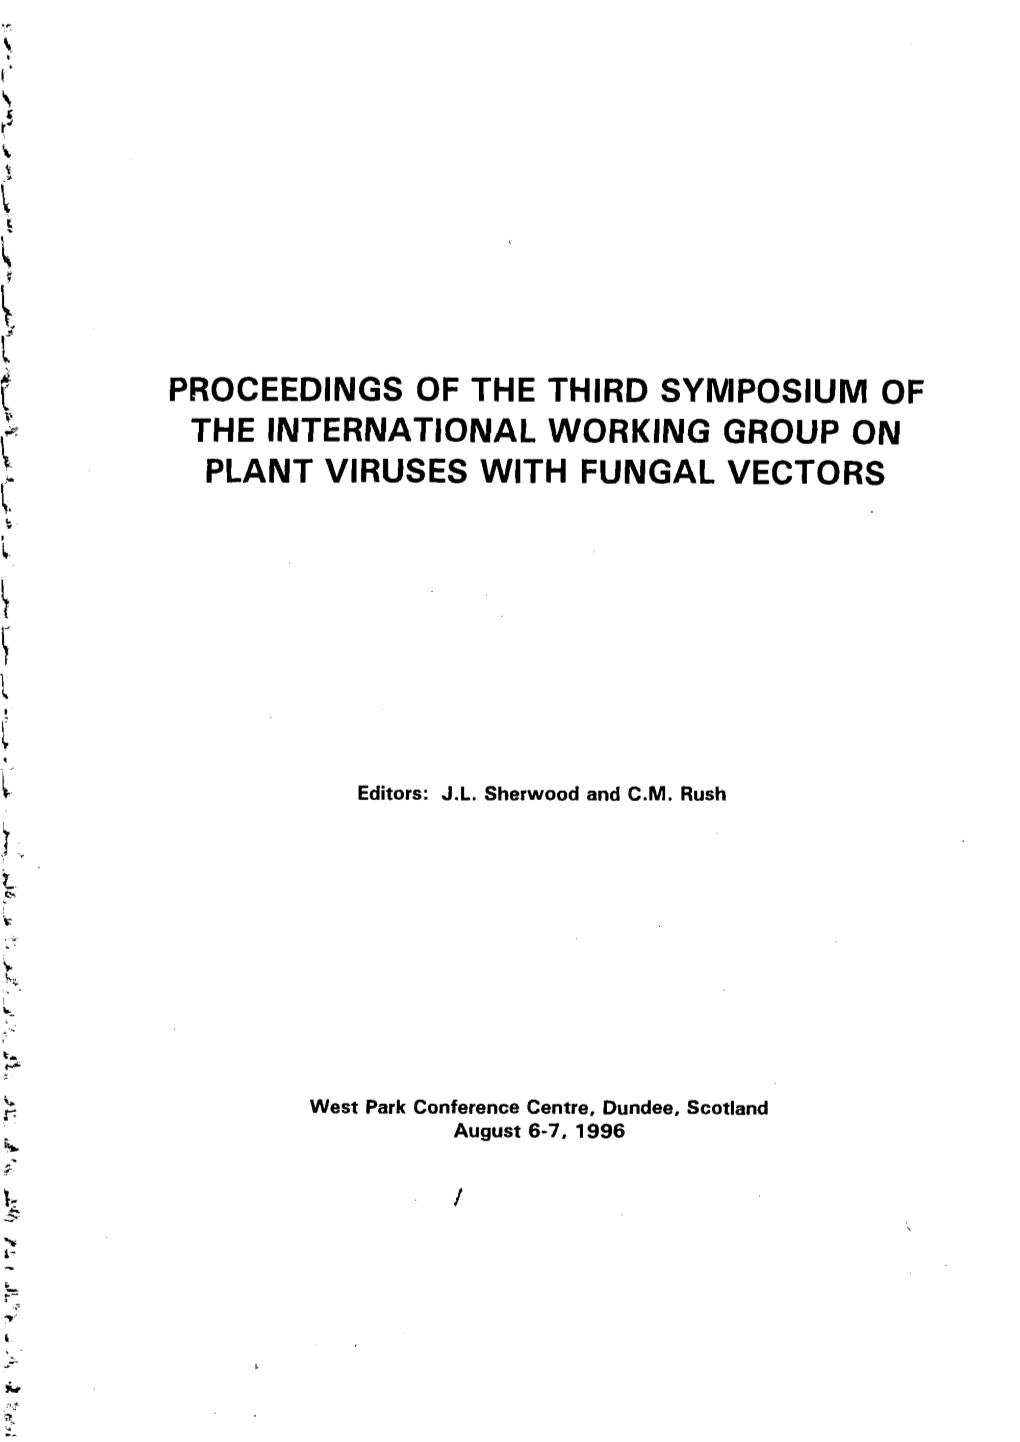 Proceedings of the Third Symposium of The